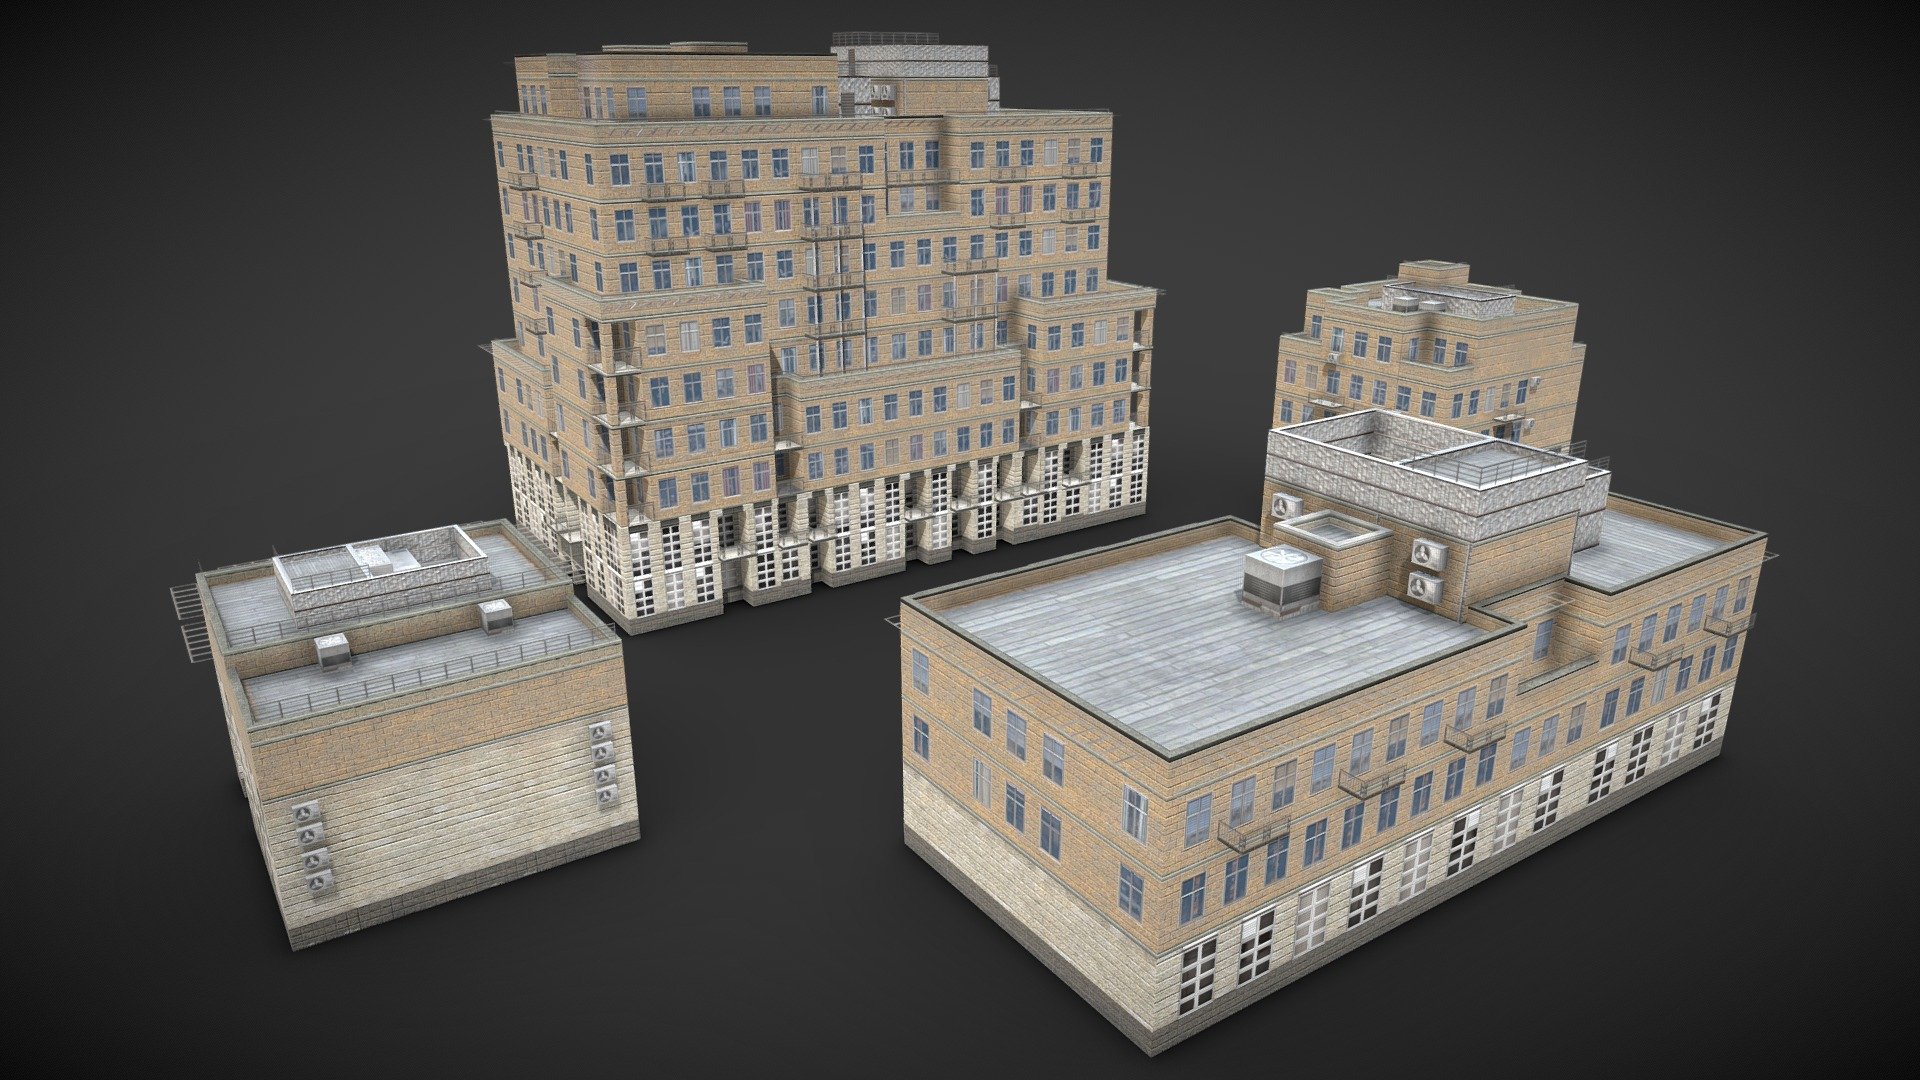 Low poly buildings for games
- 2427 tris
- 679 tris
- 426 tris
- 623 tris

4 variations sharing the same texture set.

PBR texturex 4096x4096 - City Buildings - Buy Royalty Free 3D model by Realtime (@gipapatank) 3d model